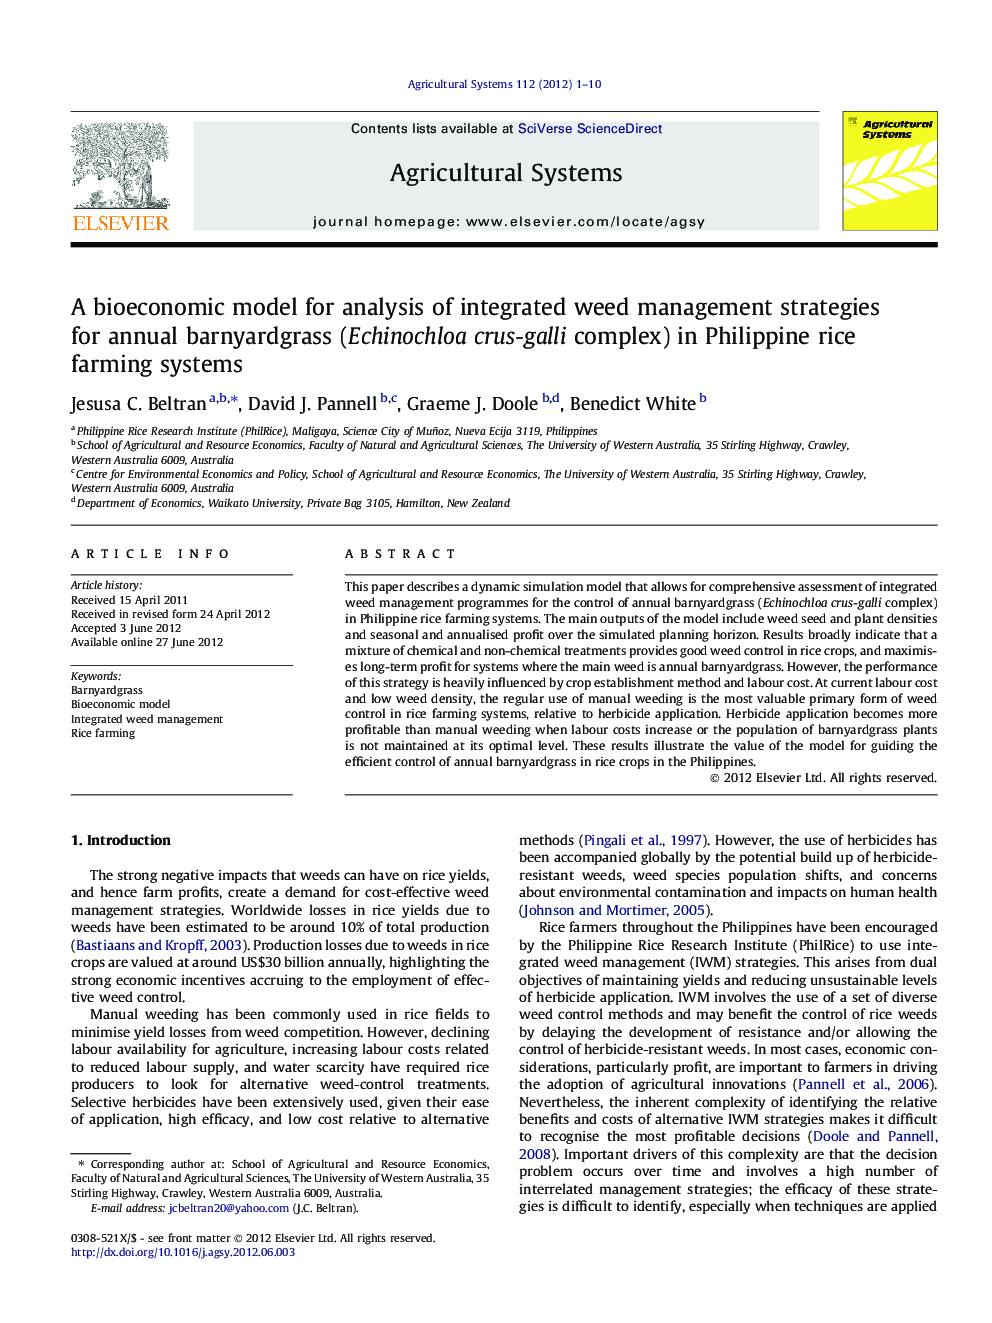 A bioeconomic model for analysis of integrated weed management strategies for annual barnyardgrass (Echinochloa crus-galli complex) in Philippine rice farming systems